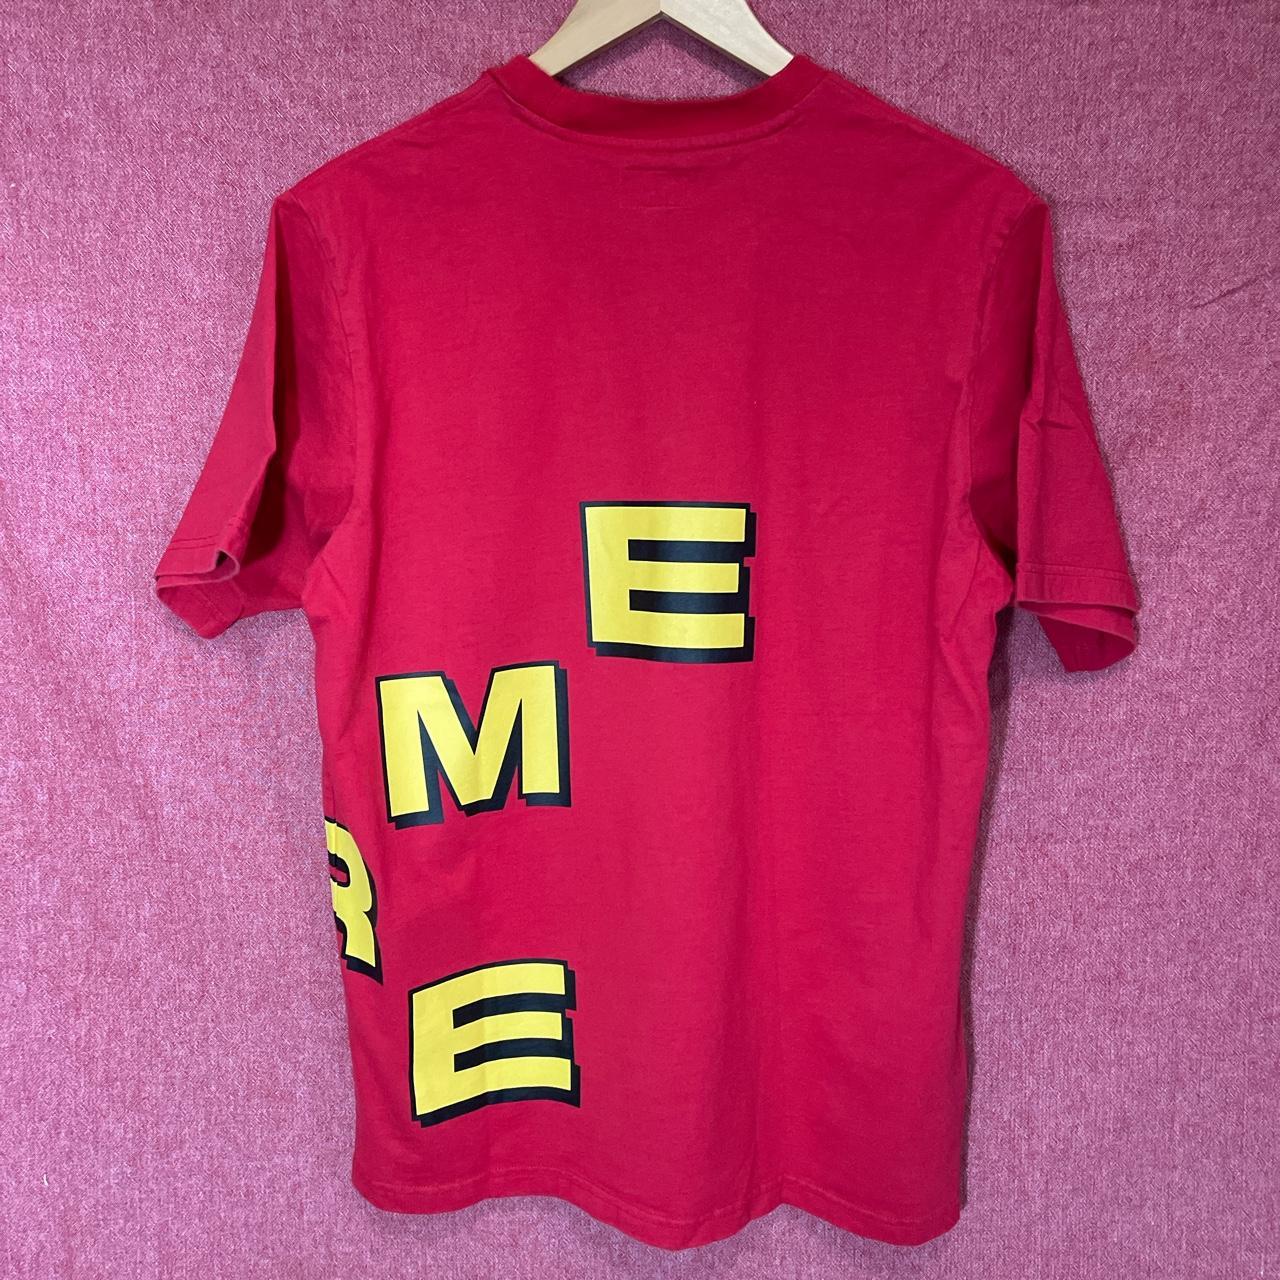 Supreme stagger tee in red ❤️🔥❤️ ✔️ 10/10 great... - Depop